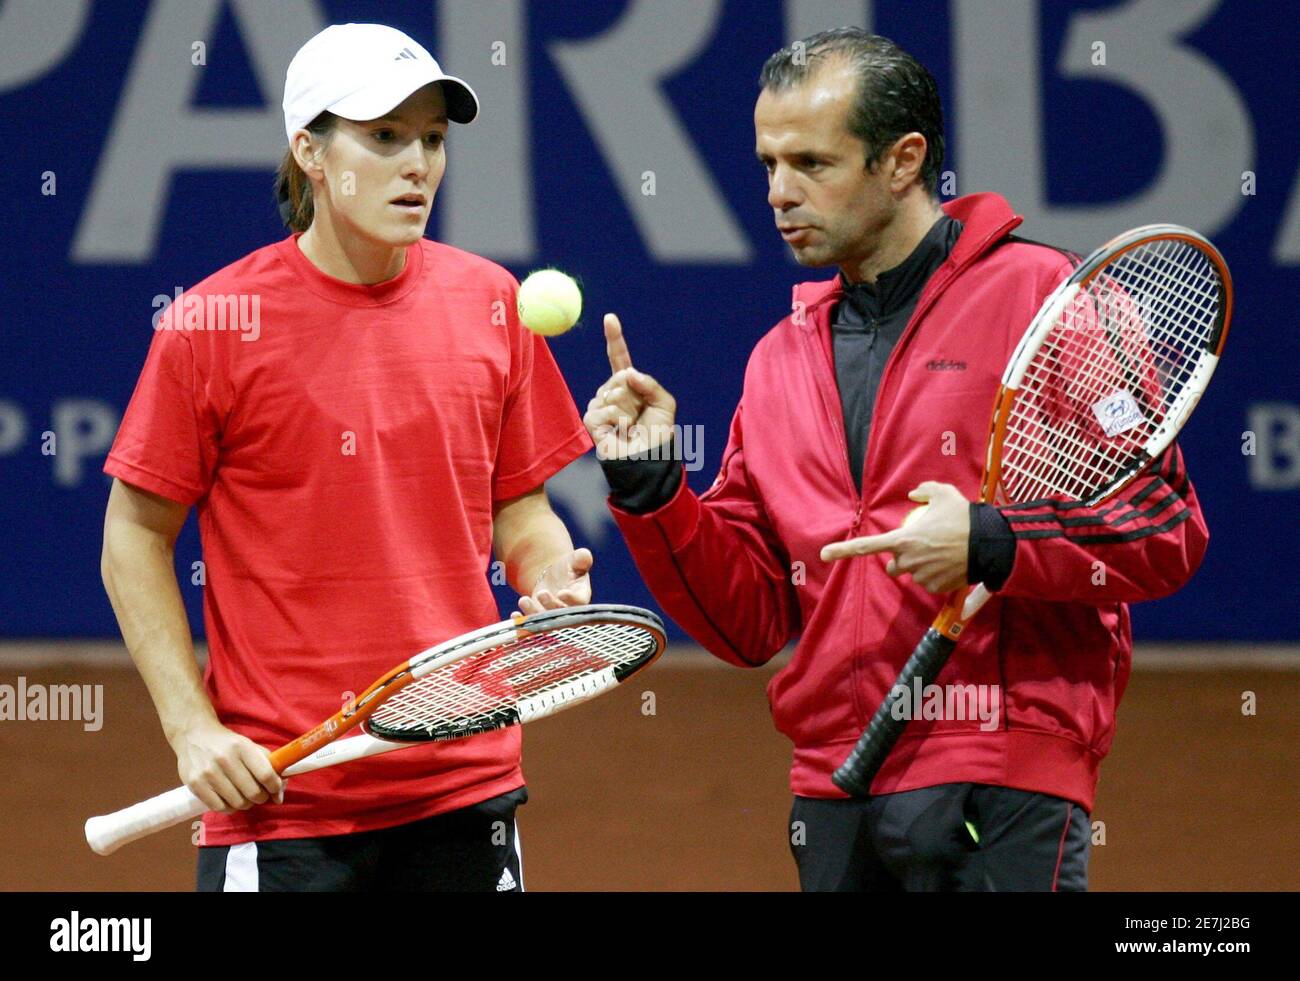 Belgium's Fed Cup tennis player Justine Henin-Hardenne listens her coach  Carlos Rodriguez (R) during a training session in Liege April 21, 2006.  Belgium will play Russia in the Fed Cup quarter-finals. REUTERS/Francois